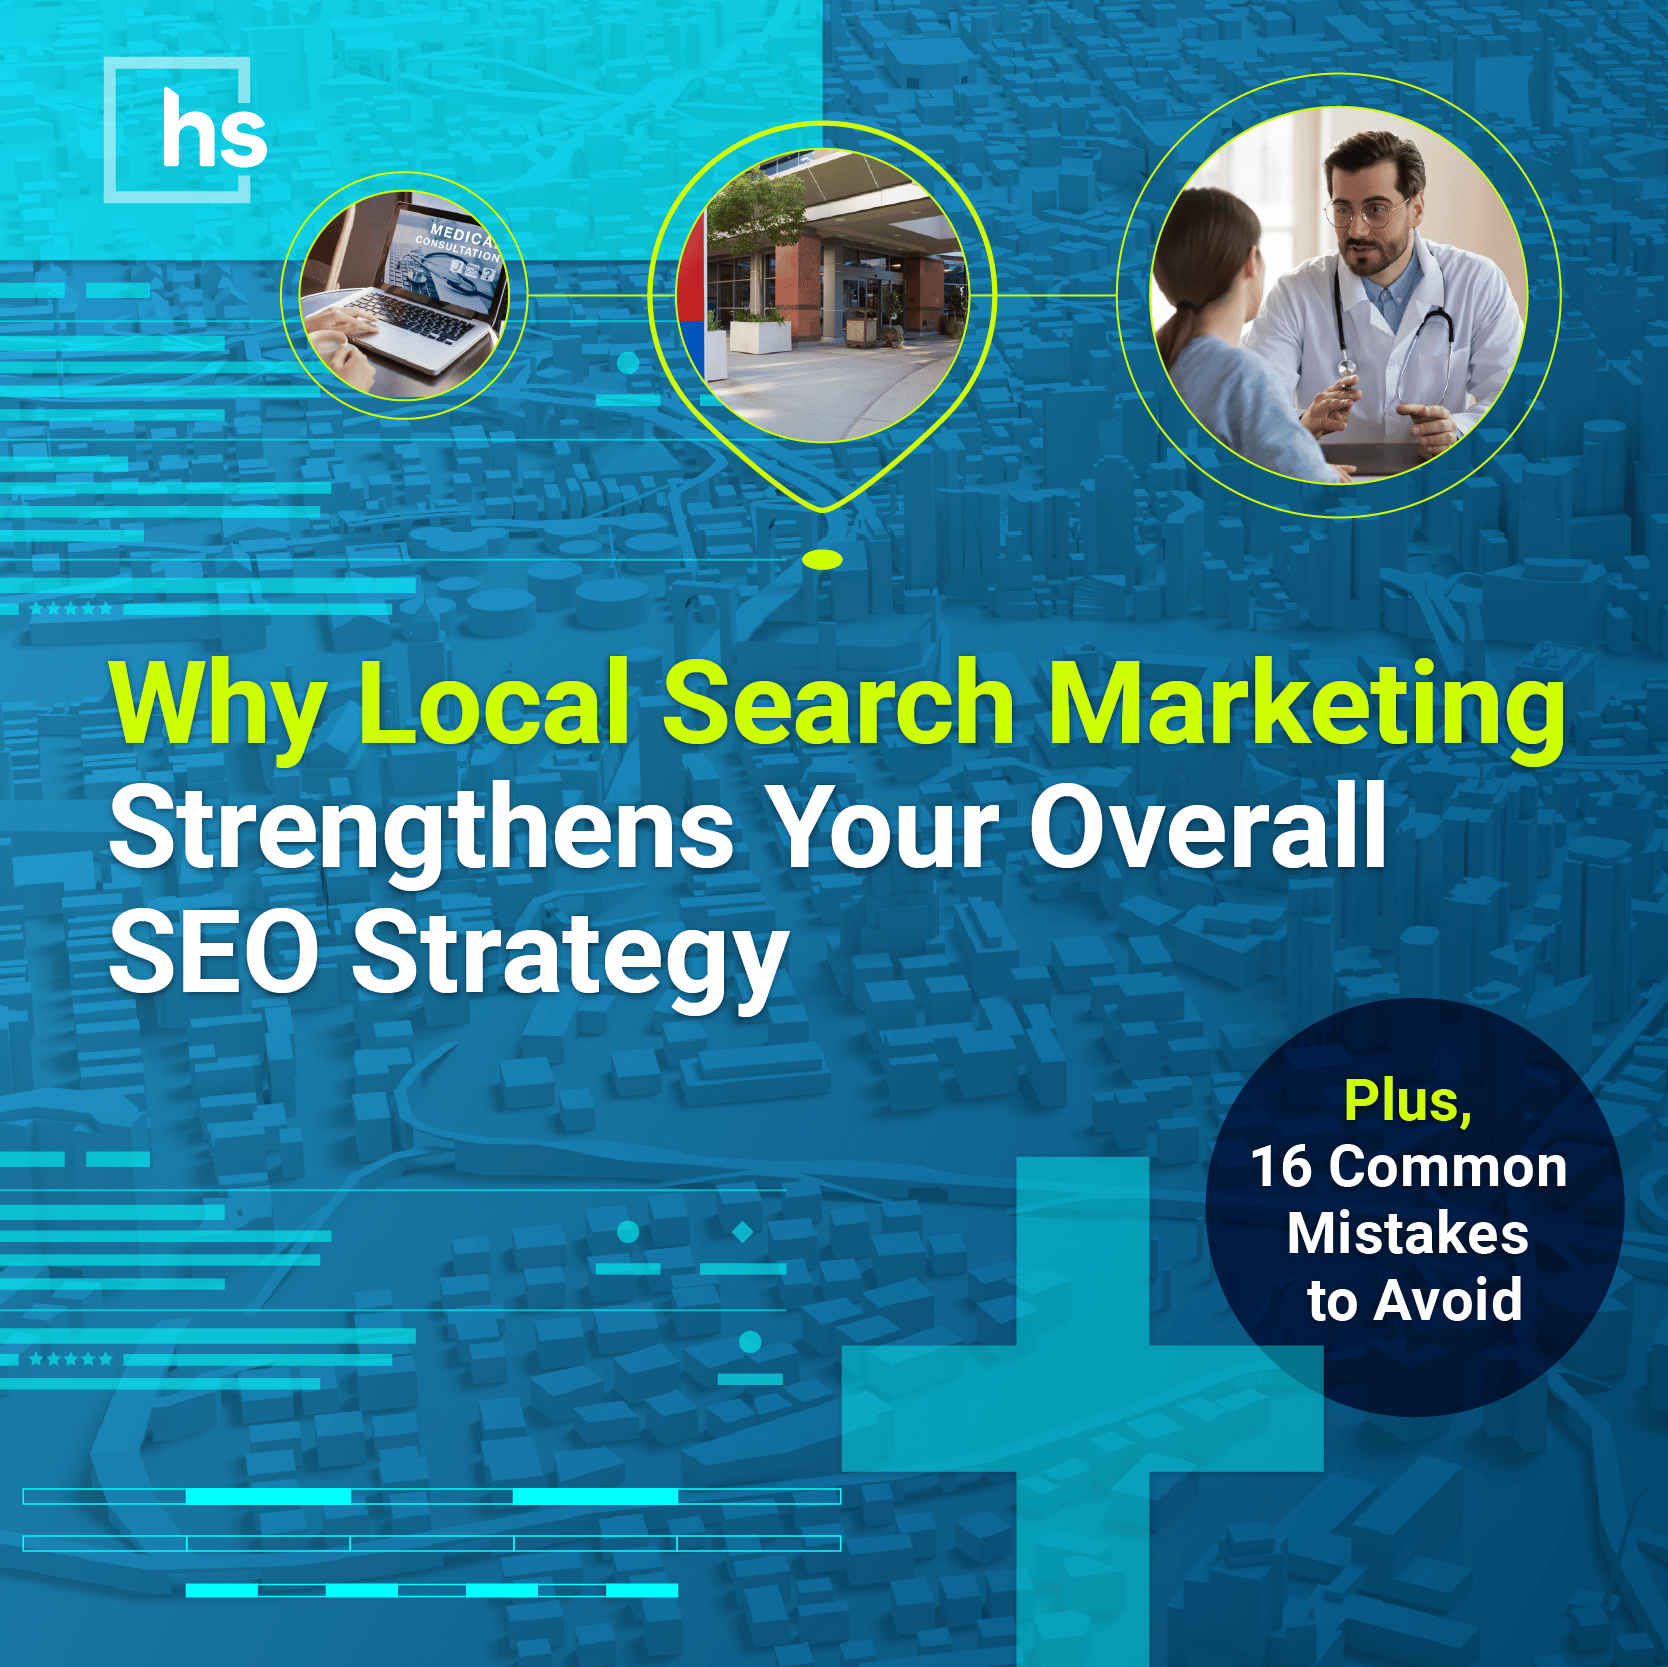 Local Search Marketing for Healthcare + Mistakes to Avoid